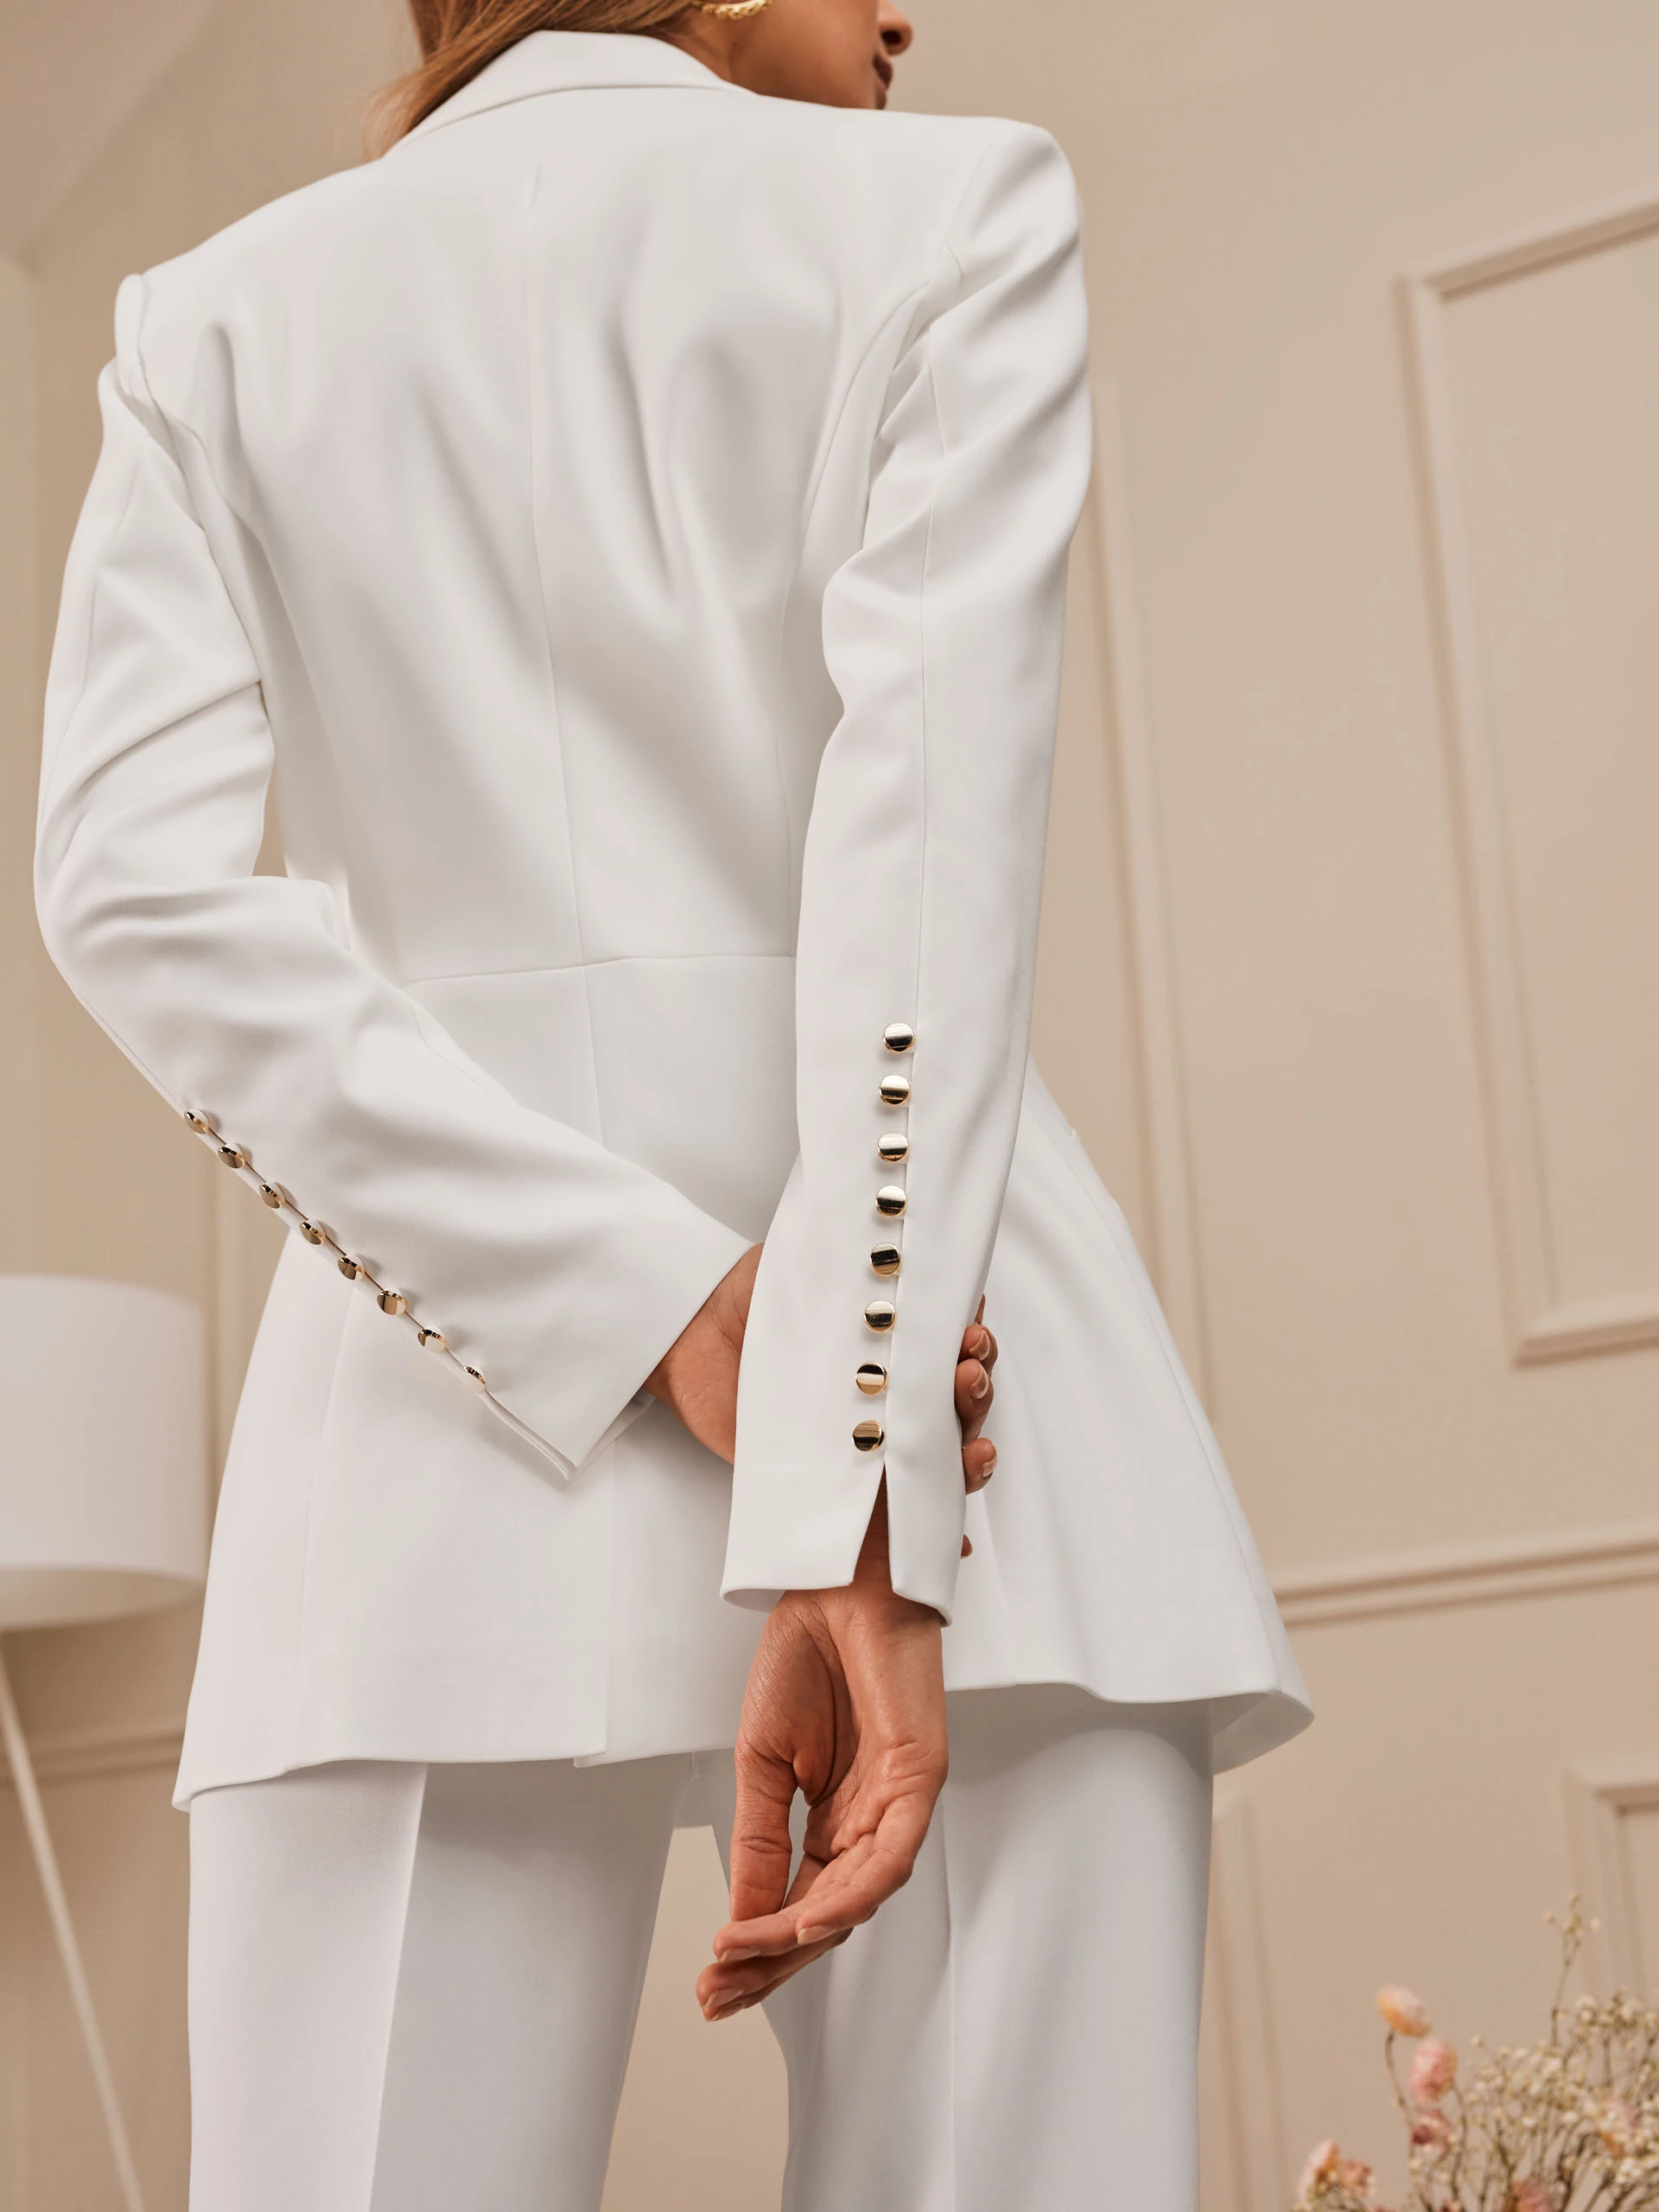 WHITE JACKET WITH GOLD BUTTONS